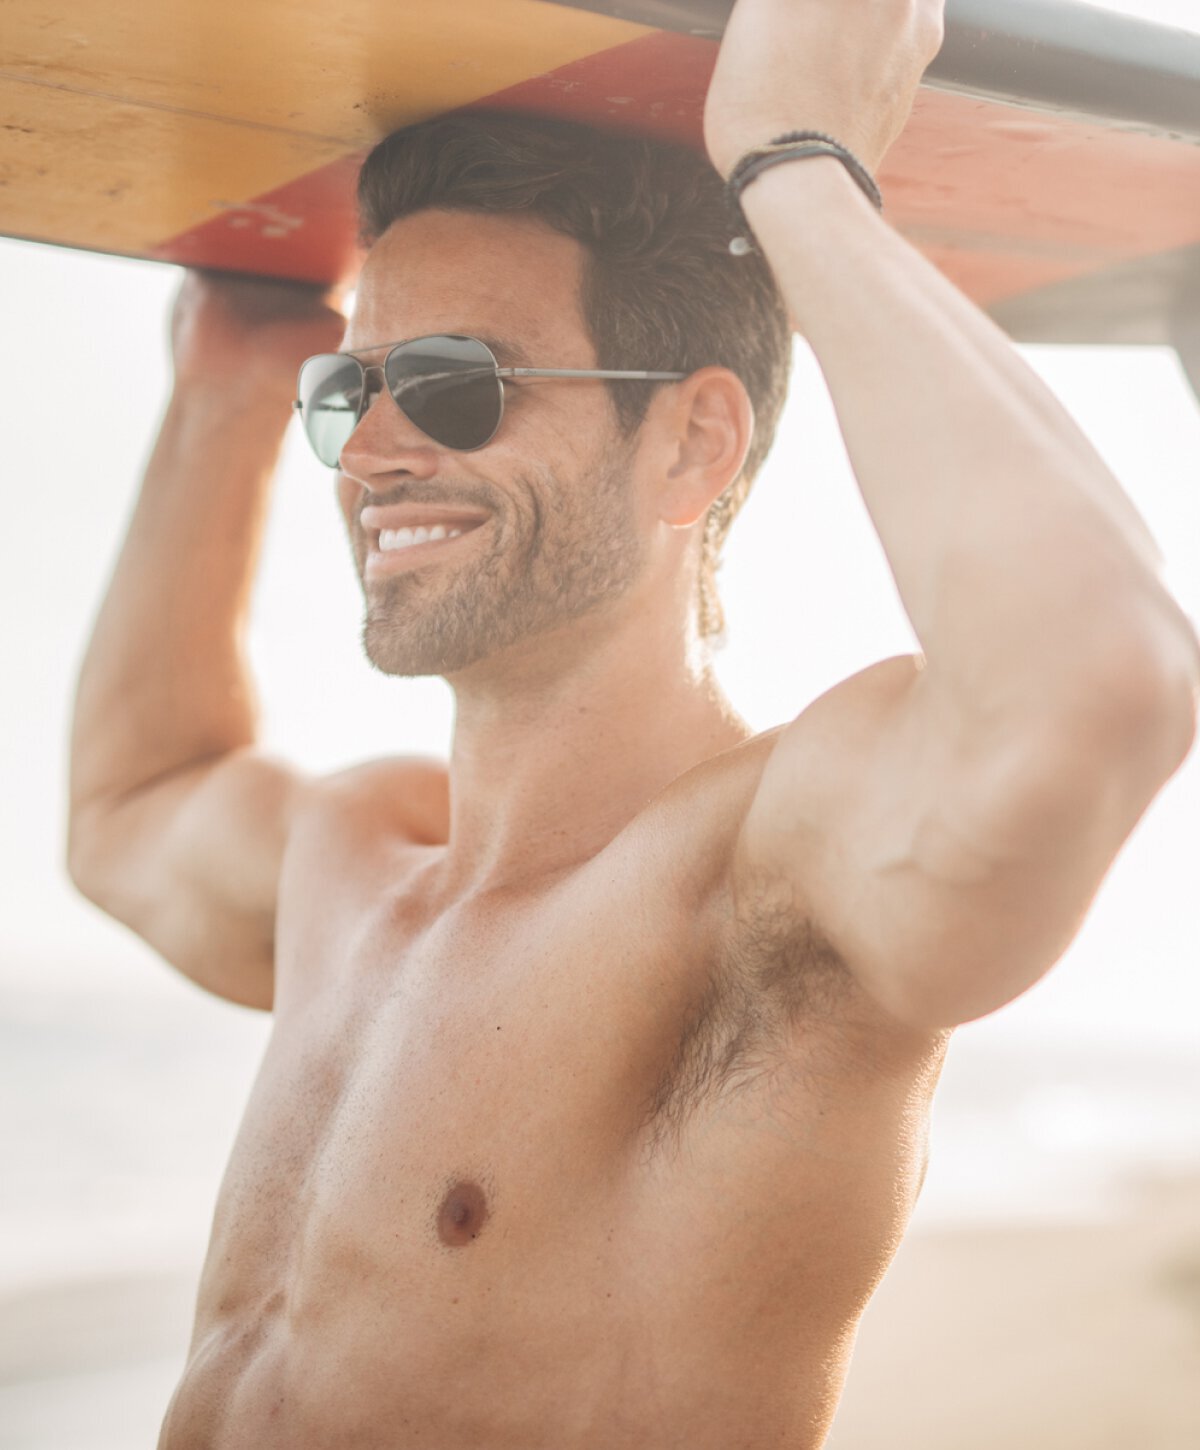 Man after gynecomastia surgery holding a surfboard above his head